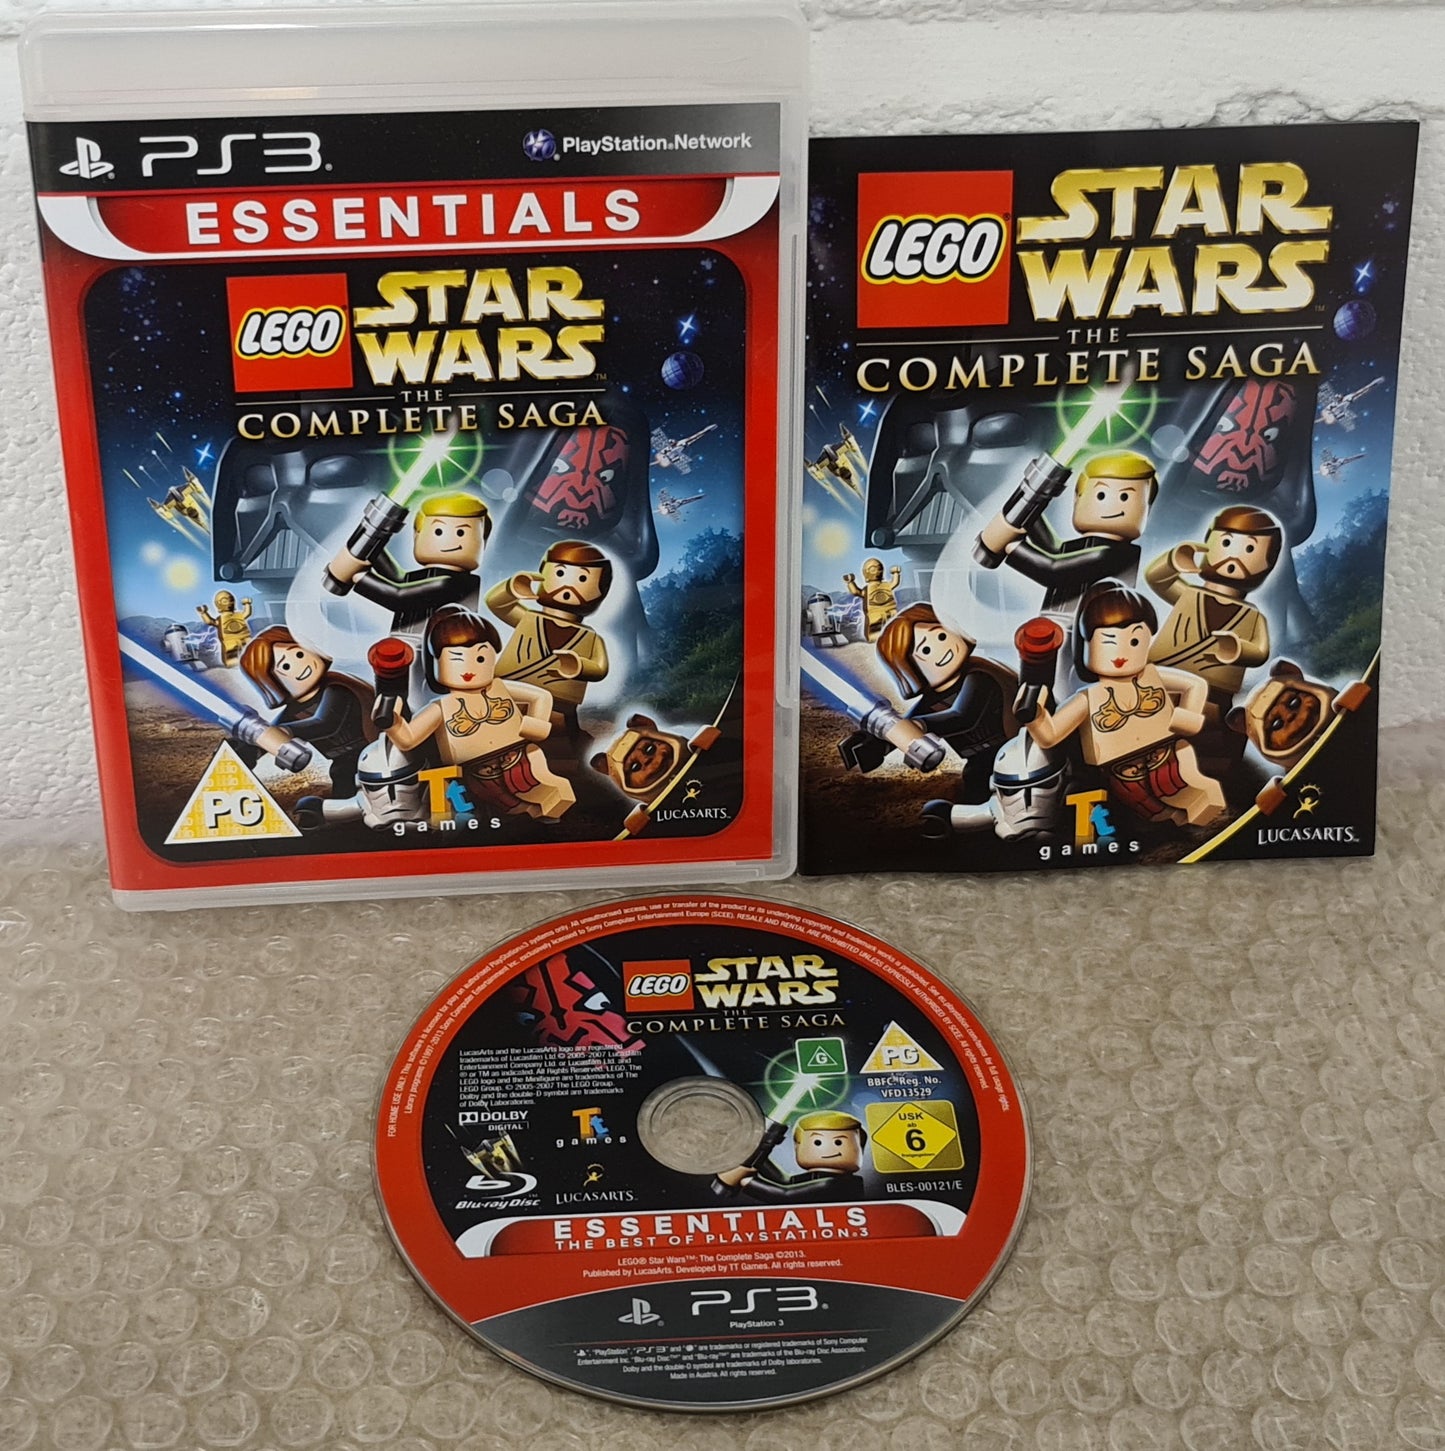 Lego Star Wars The Complete Saga Sony Playstation 3 (PS3) Game